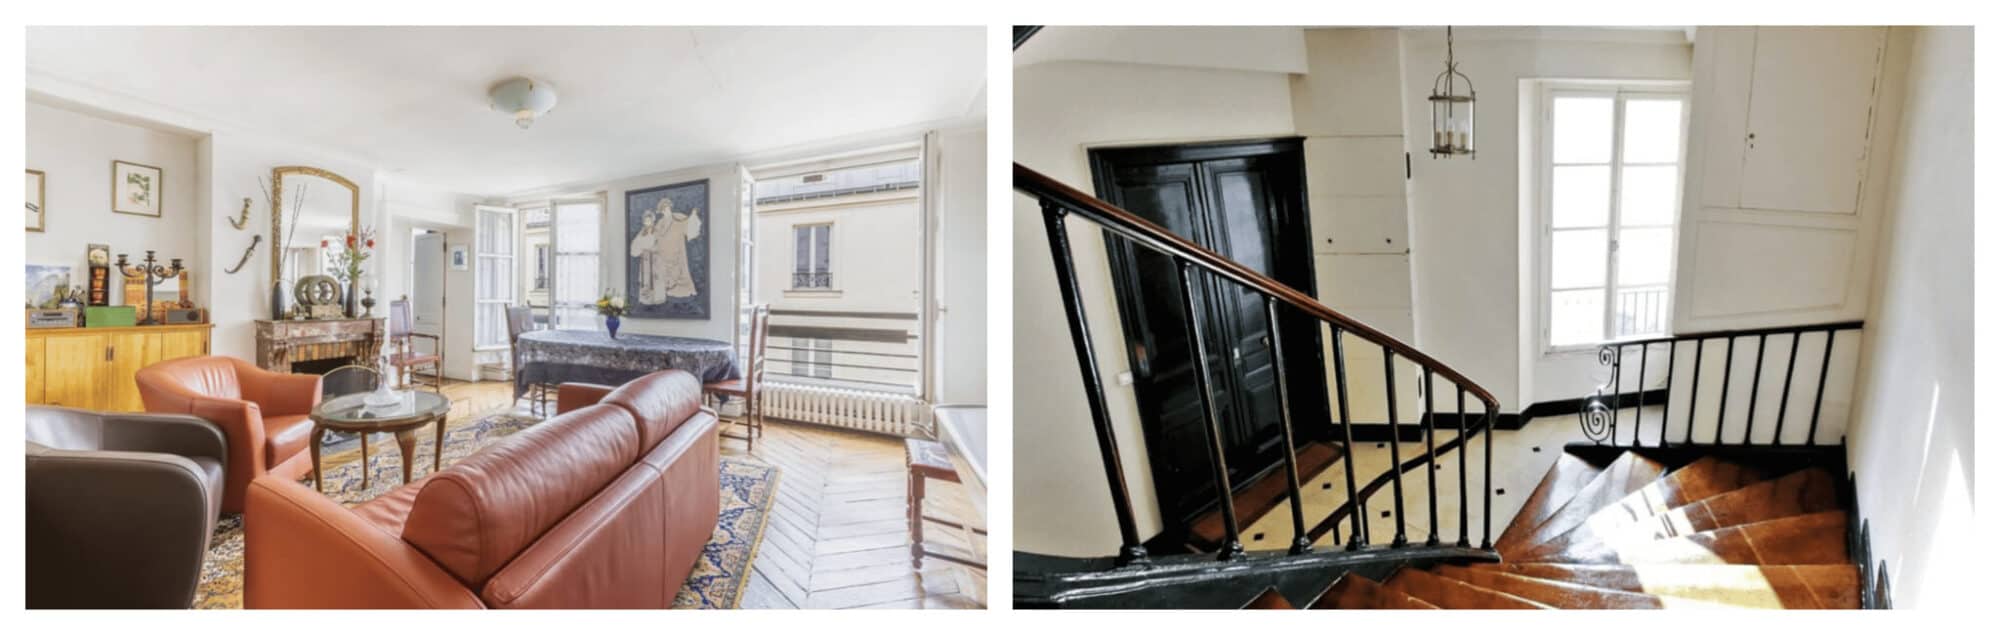 Left: A living room, with wooden floors and brown leather couch, of an apartment in rue Amelot in Paris; Right: A wooden staircase leading to said apartment in rue Amelot that has a black French entrance door.